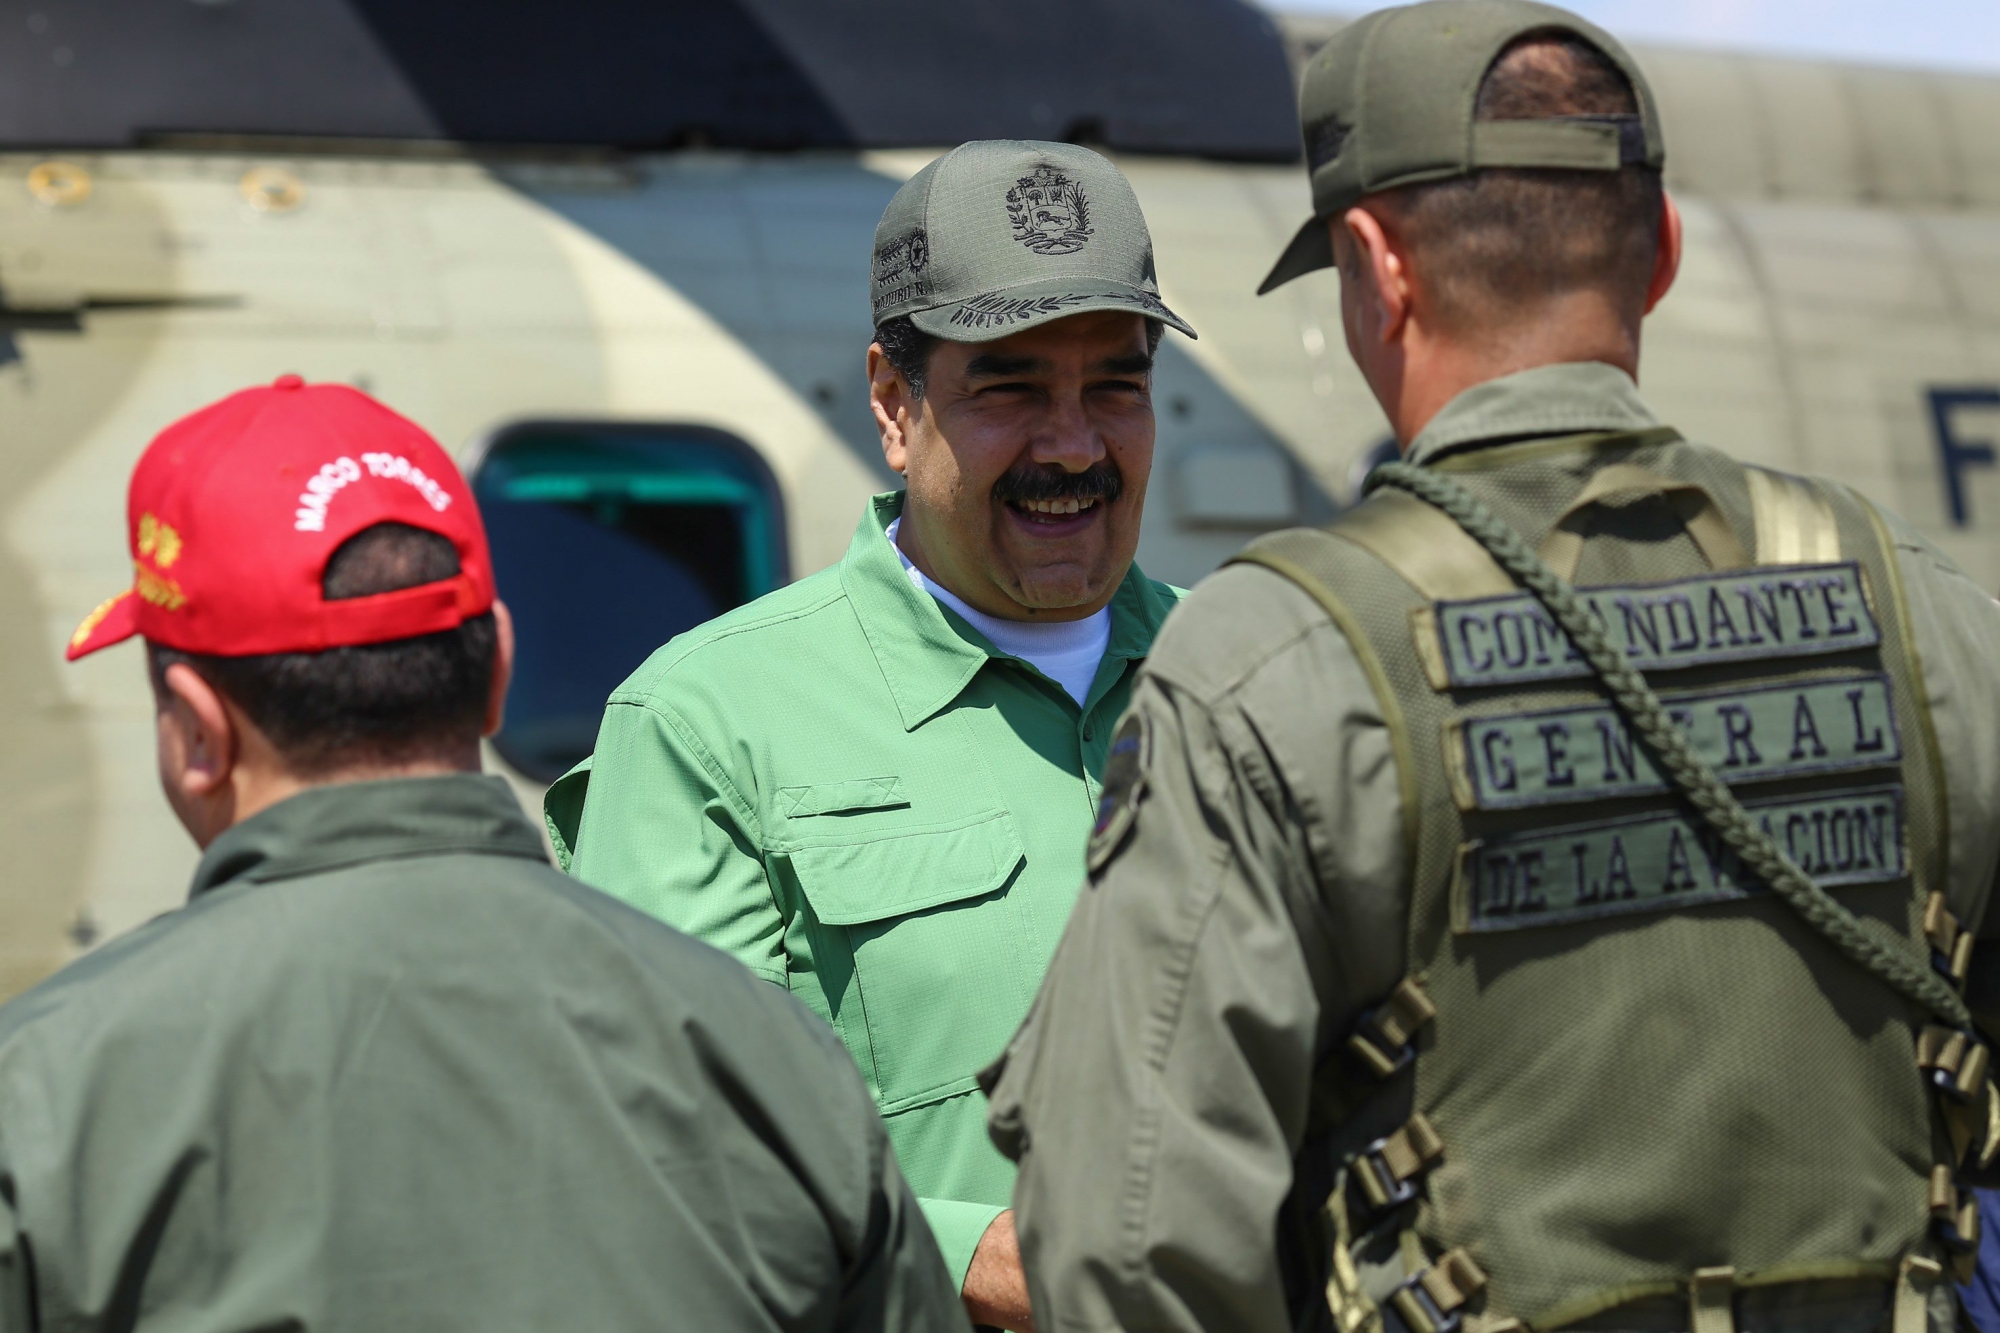 epa07330706 Handout picture made available by the Miraflores Palace which shows President of Venezuela Nicolas Maduro (C) during a visit to a military base, in Aragua, Venezuela, 29 January 2019. During the visit Maduro supervised the military exercises and in a speech described as 'childish' the foreign policy of the United States, after the US National Security Advisor John Bolton, left visible a notebook that read '5,000 troops to Colombia'.  EPA/Miraflores Press / HANDOUT  HANDOUT EDITORIAL USE ONLY/NO SALES VENEZUELA CRISIS